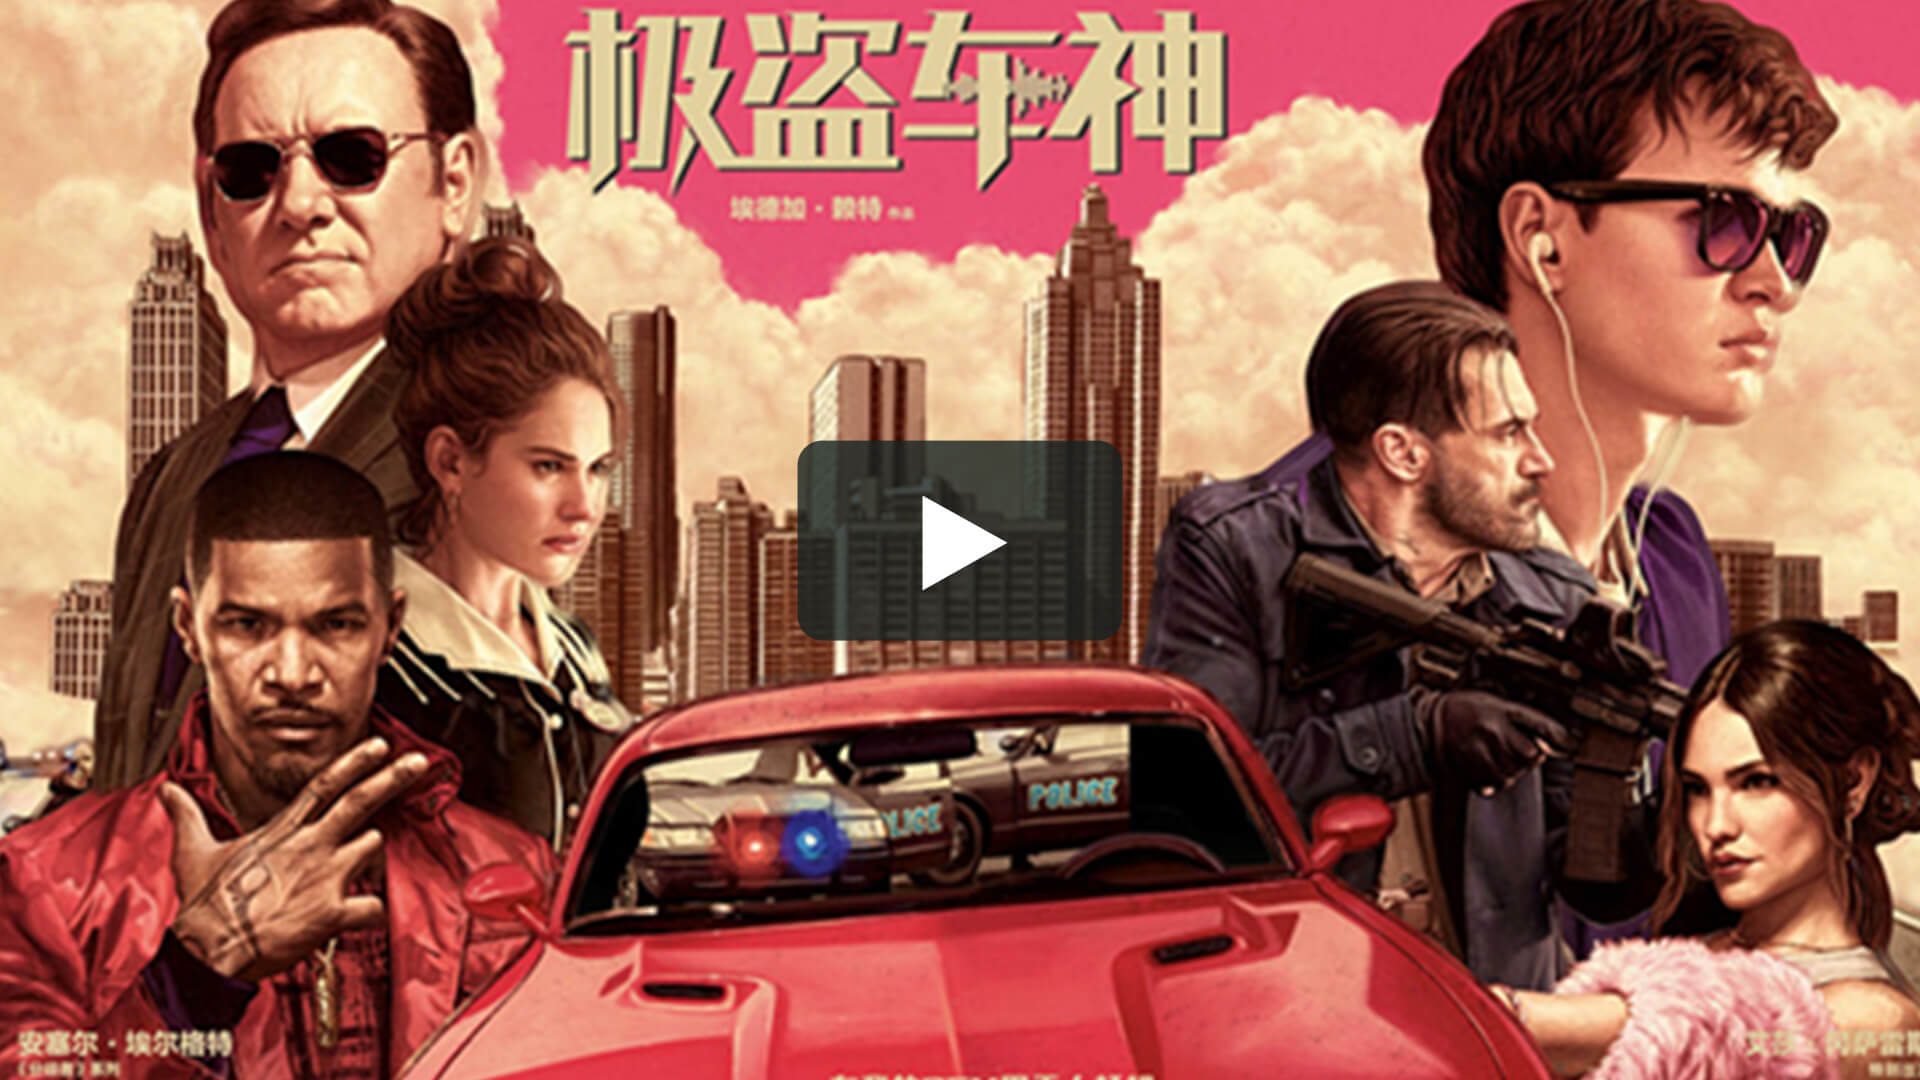 Baby Driver - 極盜車神